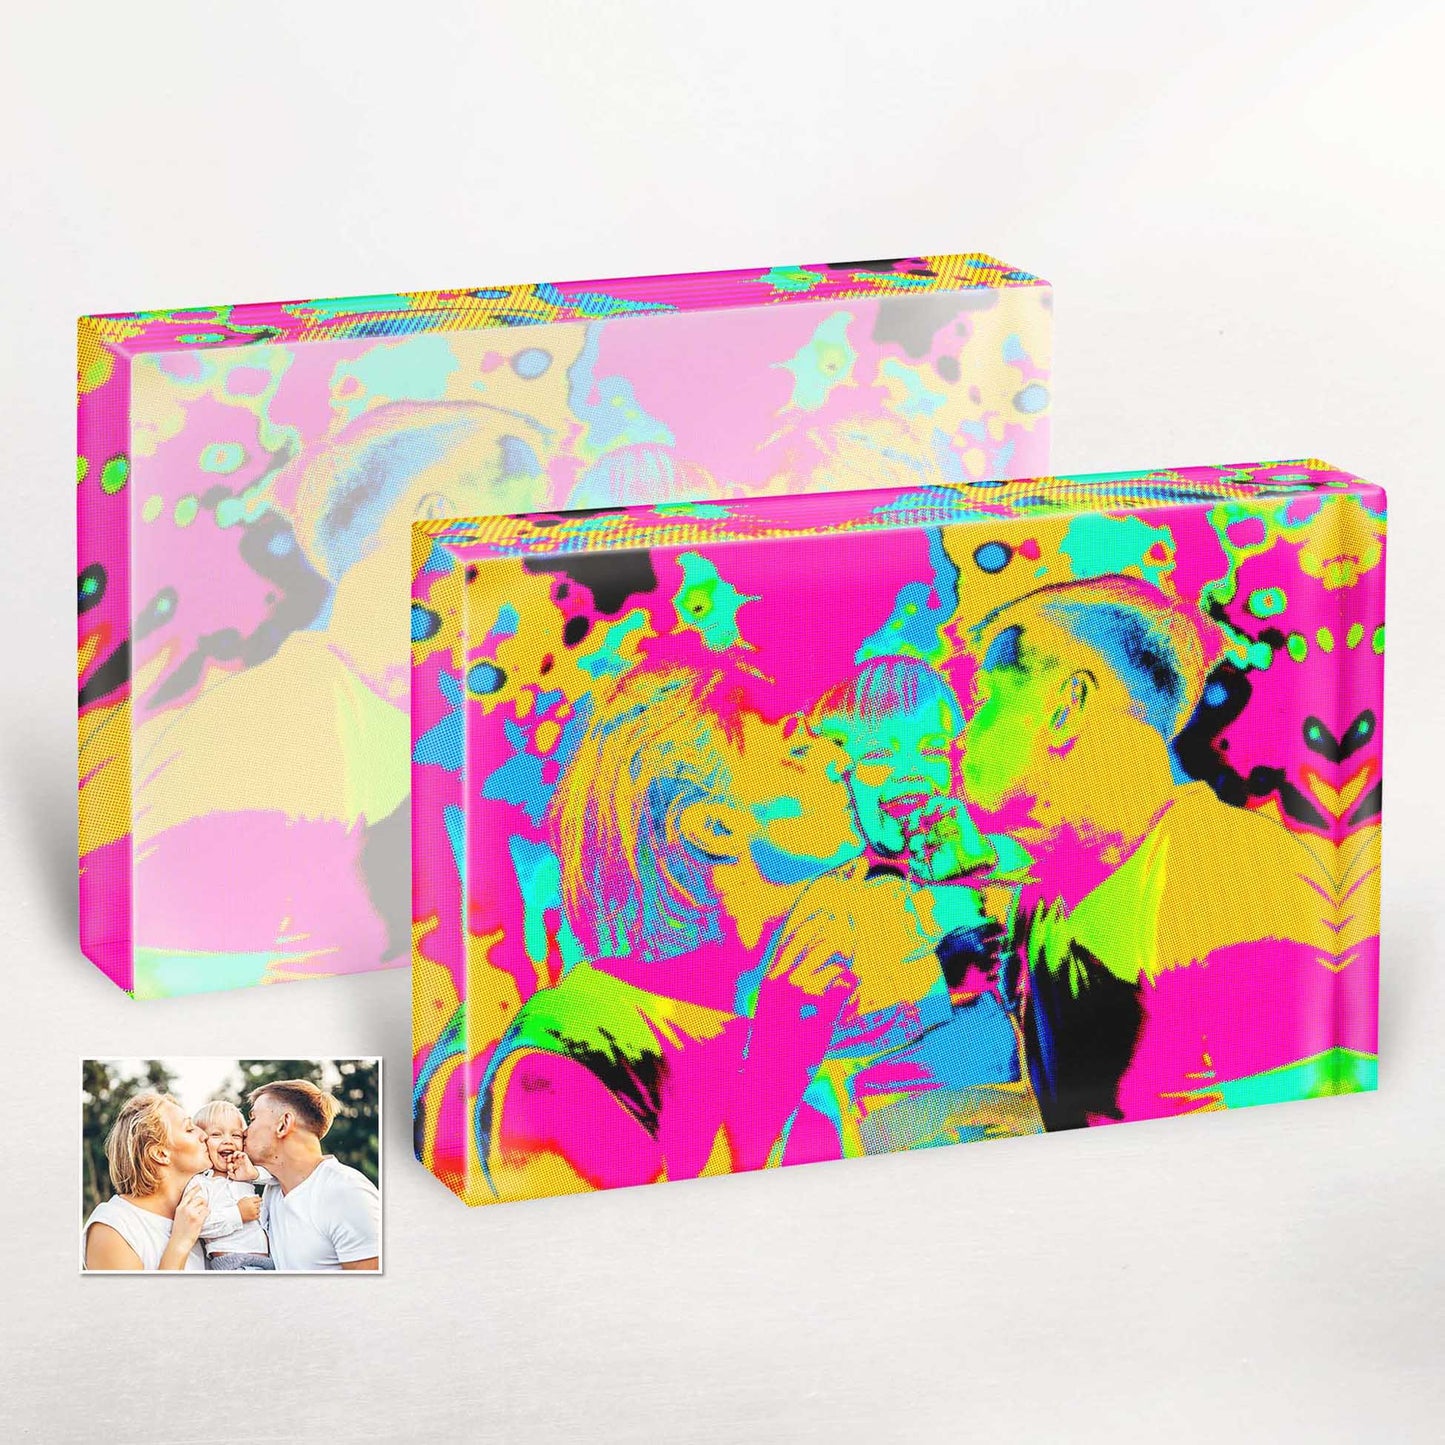 Personalised Pop Art Acrylic Block Photo: A celebration of color and creativity. This fun and exciting piece showcases bright and vibrant hues, capturing the essence of pop art. It serves as a unique and energizing